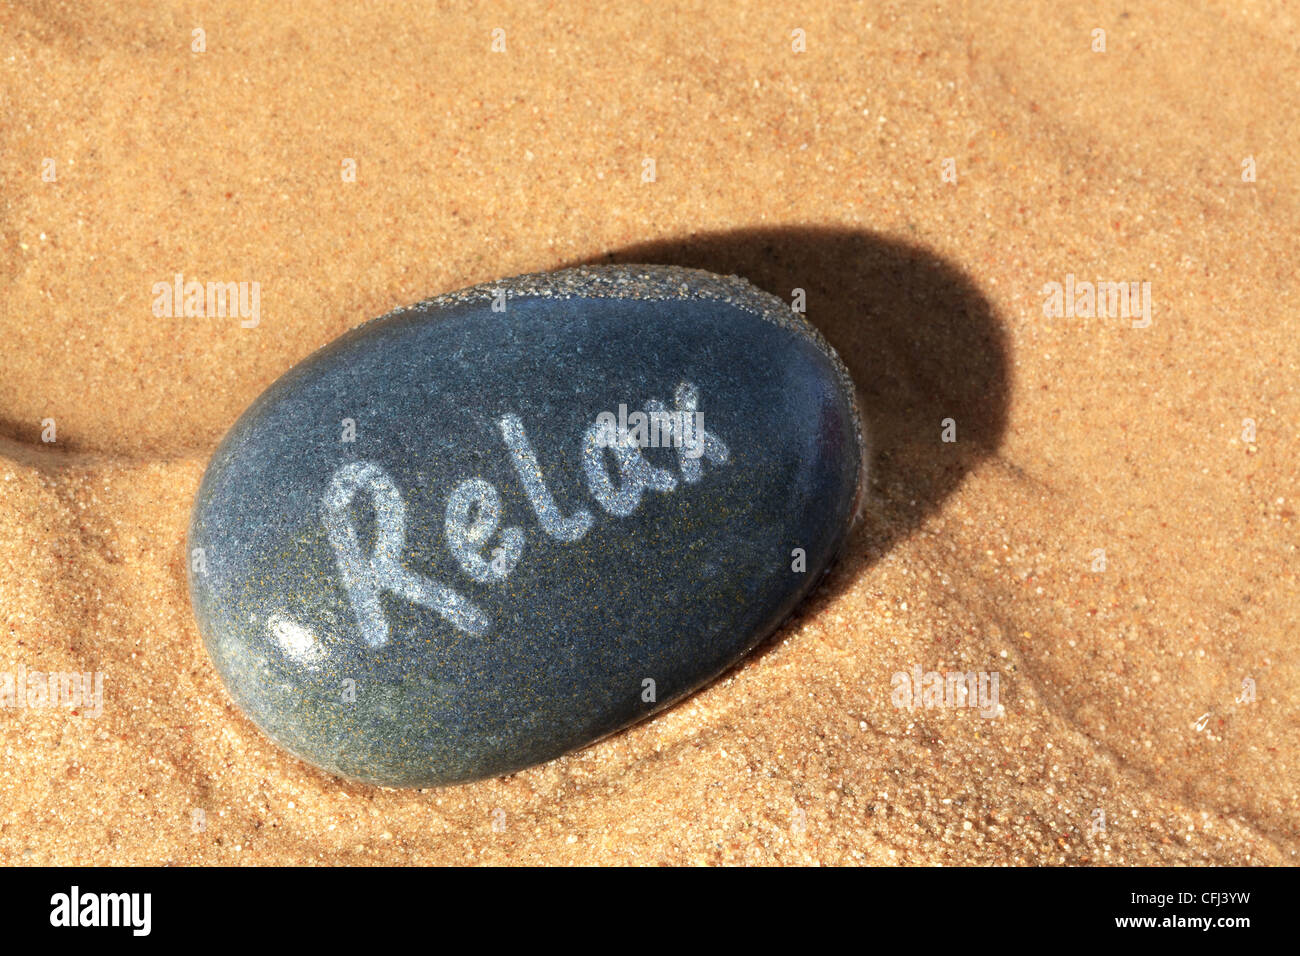 Concept photo of a wet pebble on the beach with the word Relax on it with the late setting sunshine casting a shadow. Stock Photo